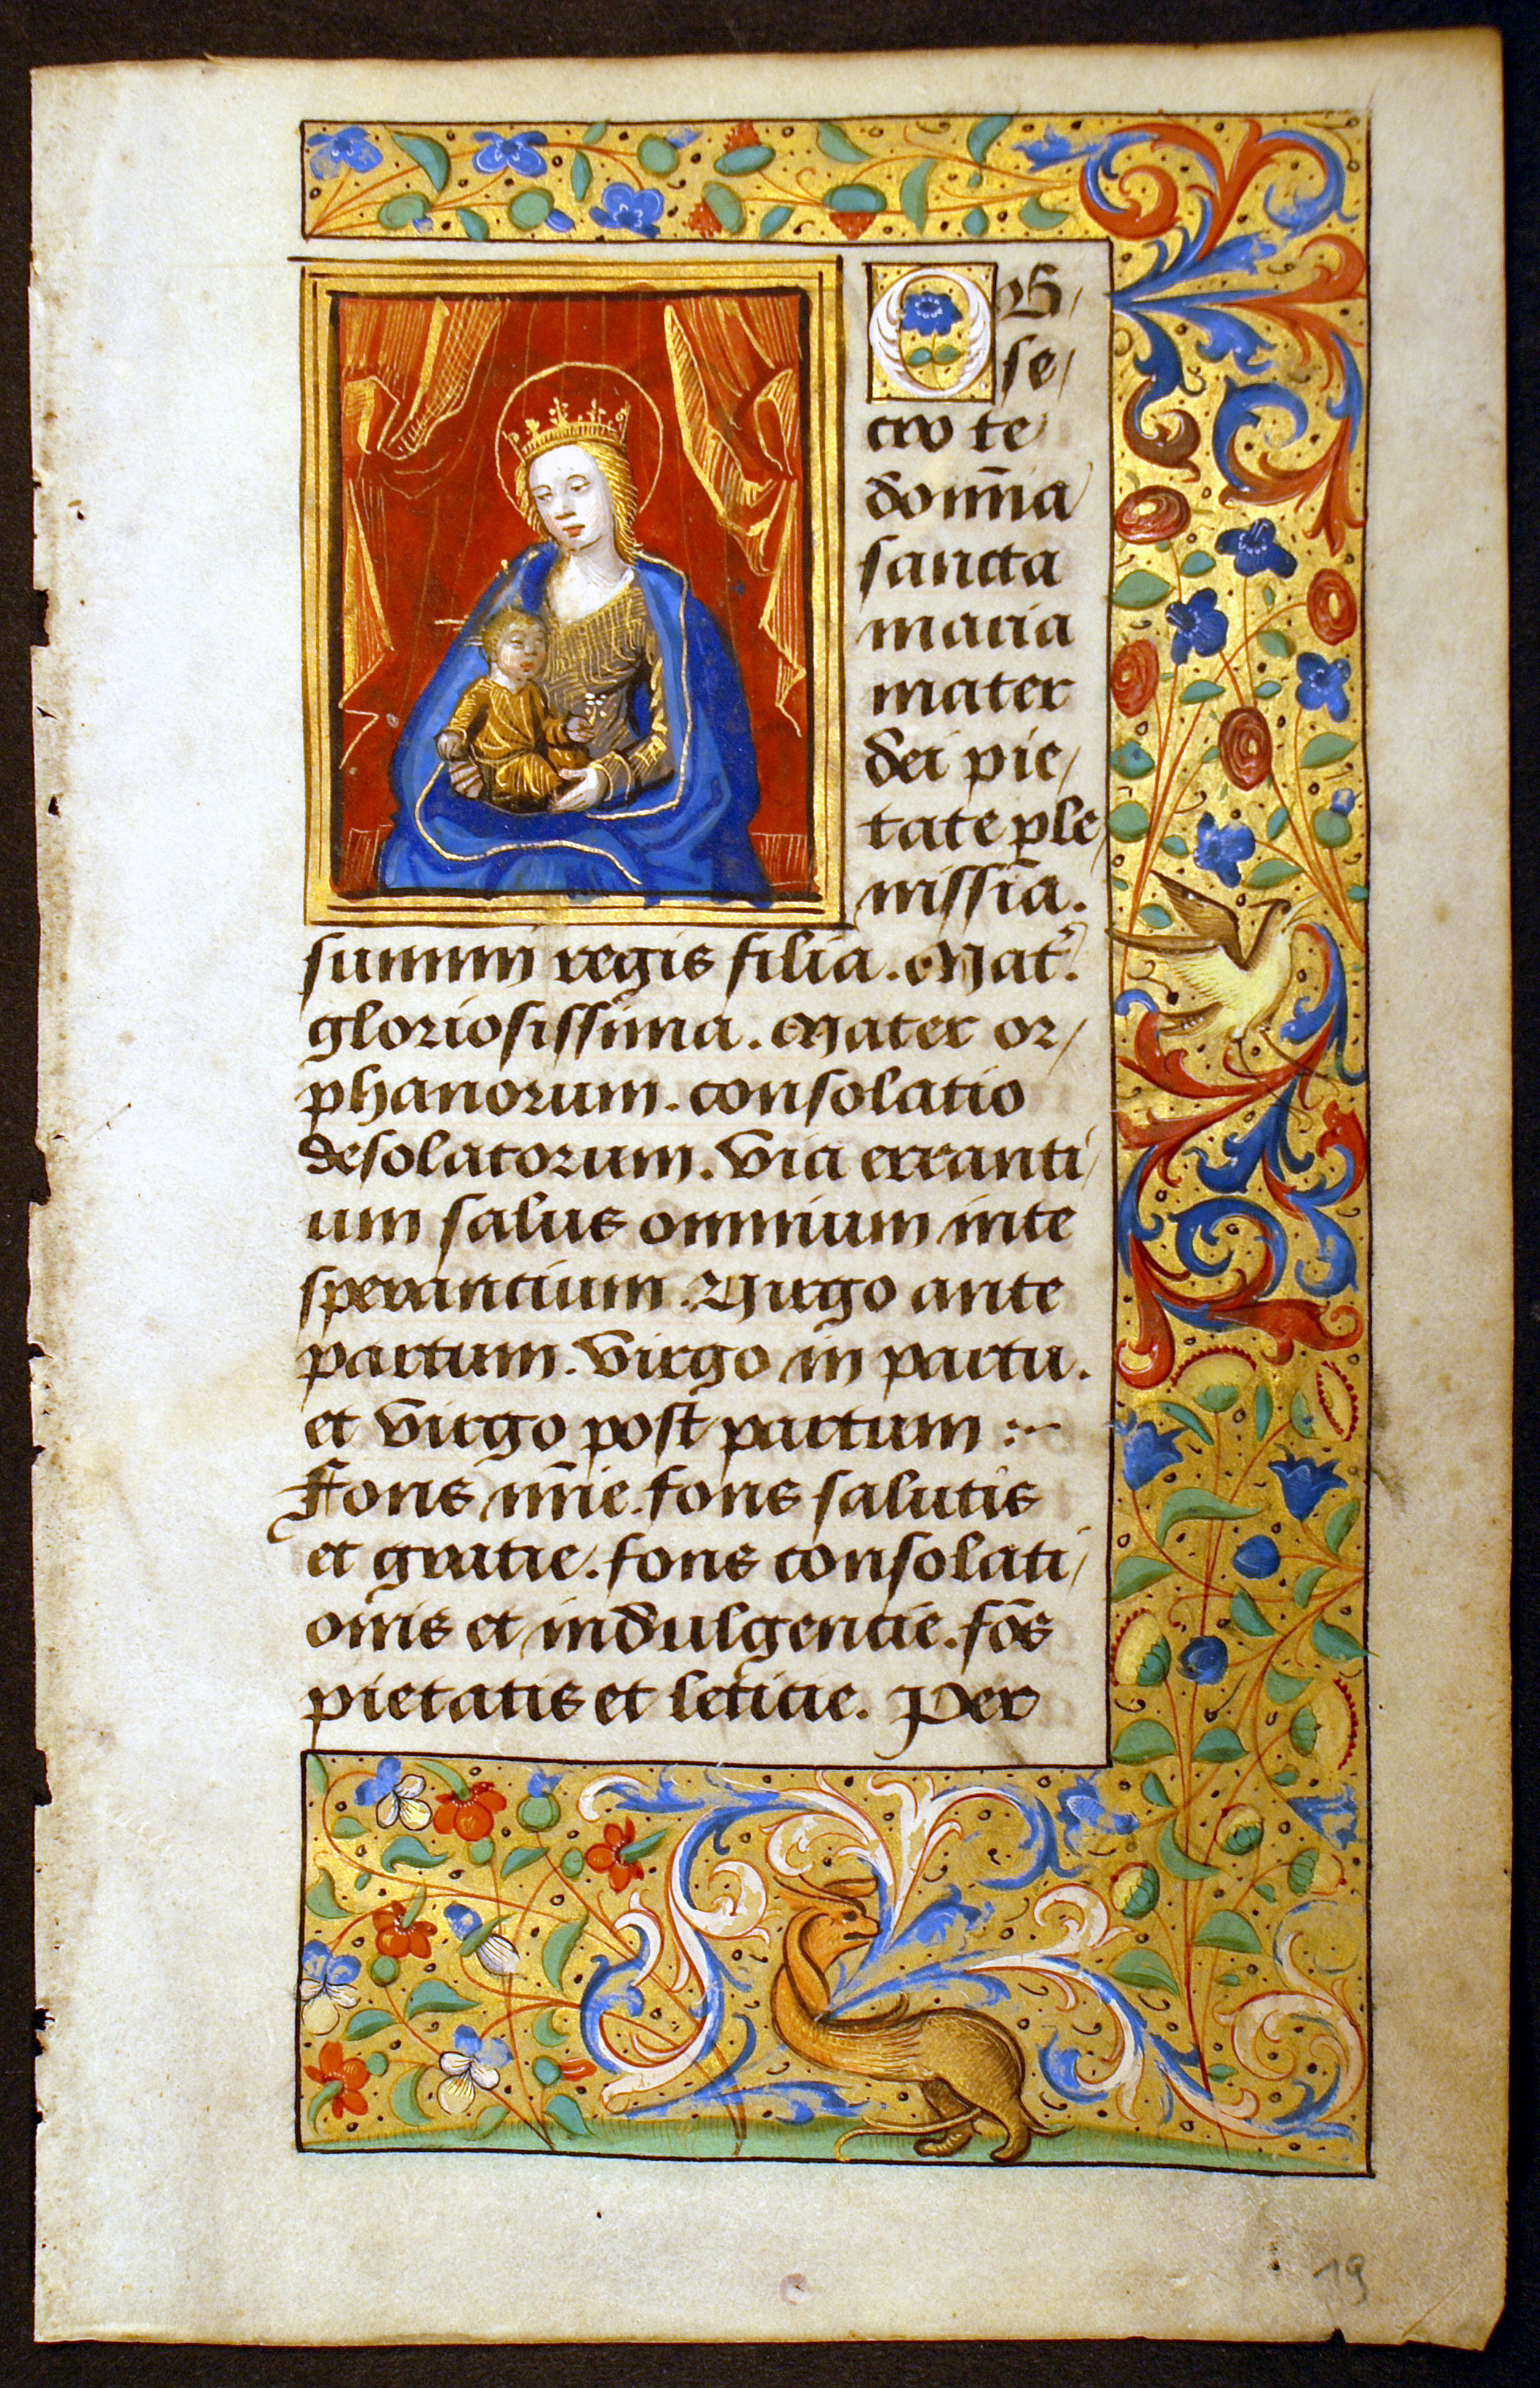 Book of Hours Leaf - Madonna & Child - whimsical creature